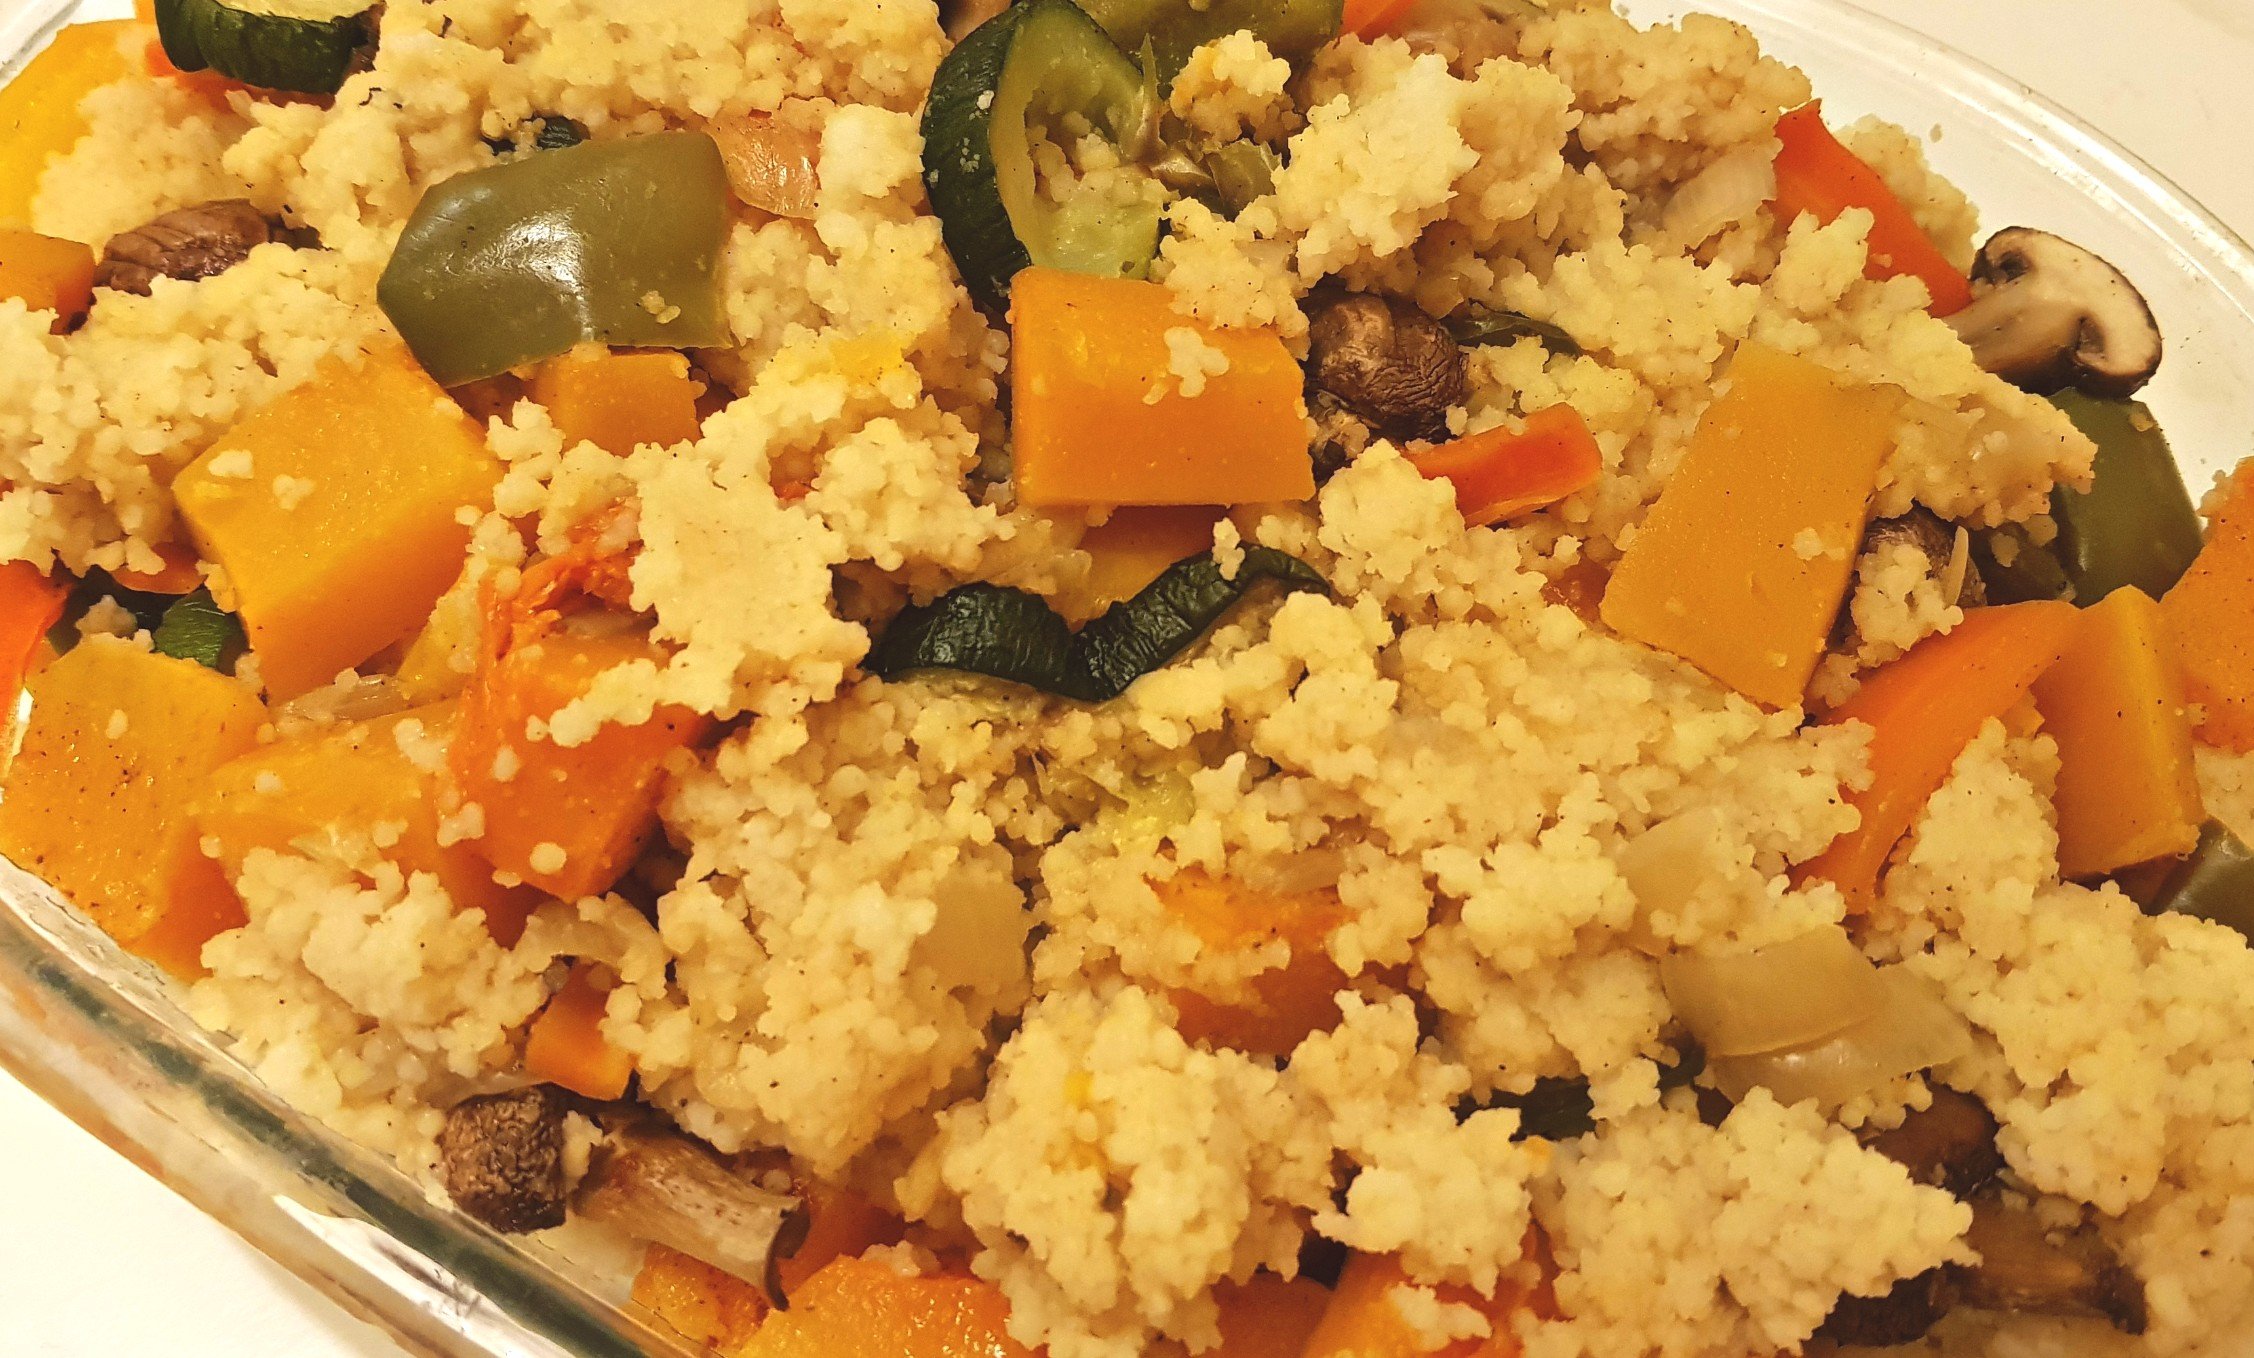 recipe, healthy, vegetarian, microwave, easy meals, clean eating, family dinner, stress-free mealtimes, life hacks, roasted vegetable couscous